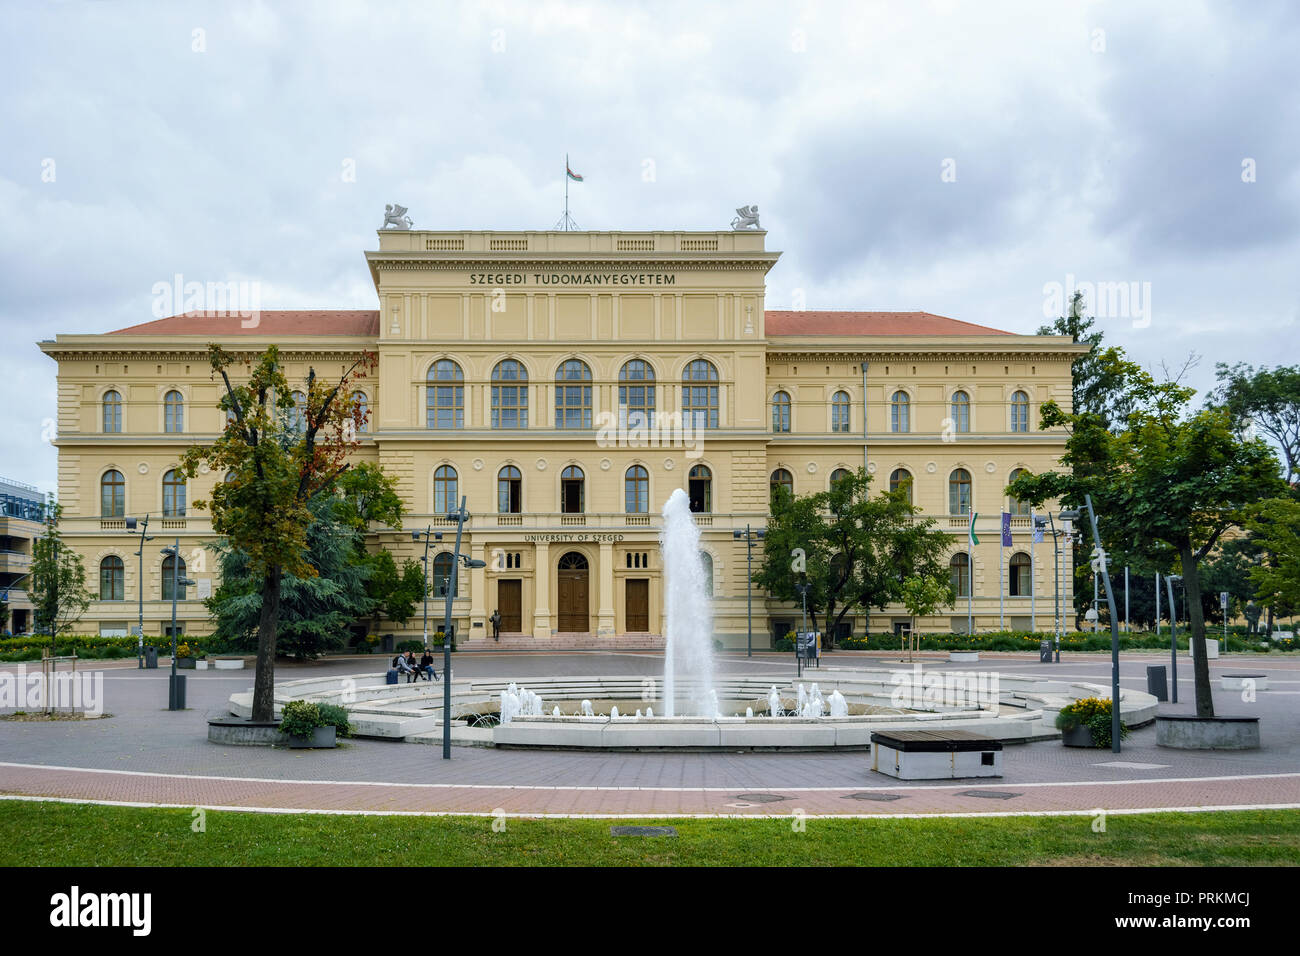 Szeged, Hungary, June 27: The main building of the University of Szeged with a fountain in the square, where students sit, June 27, 2018. Stock Photo